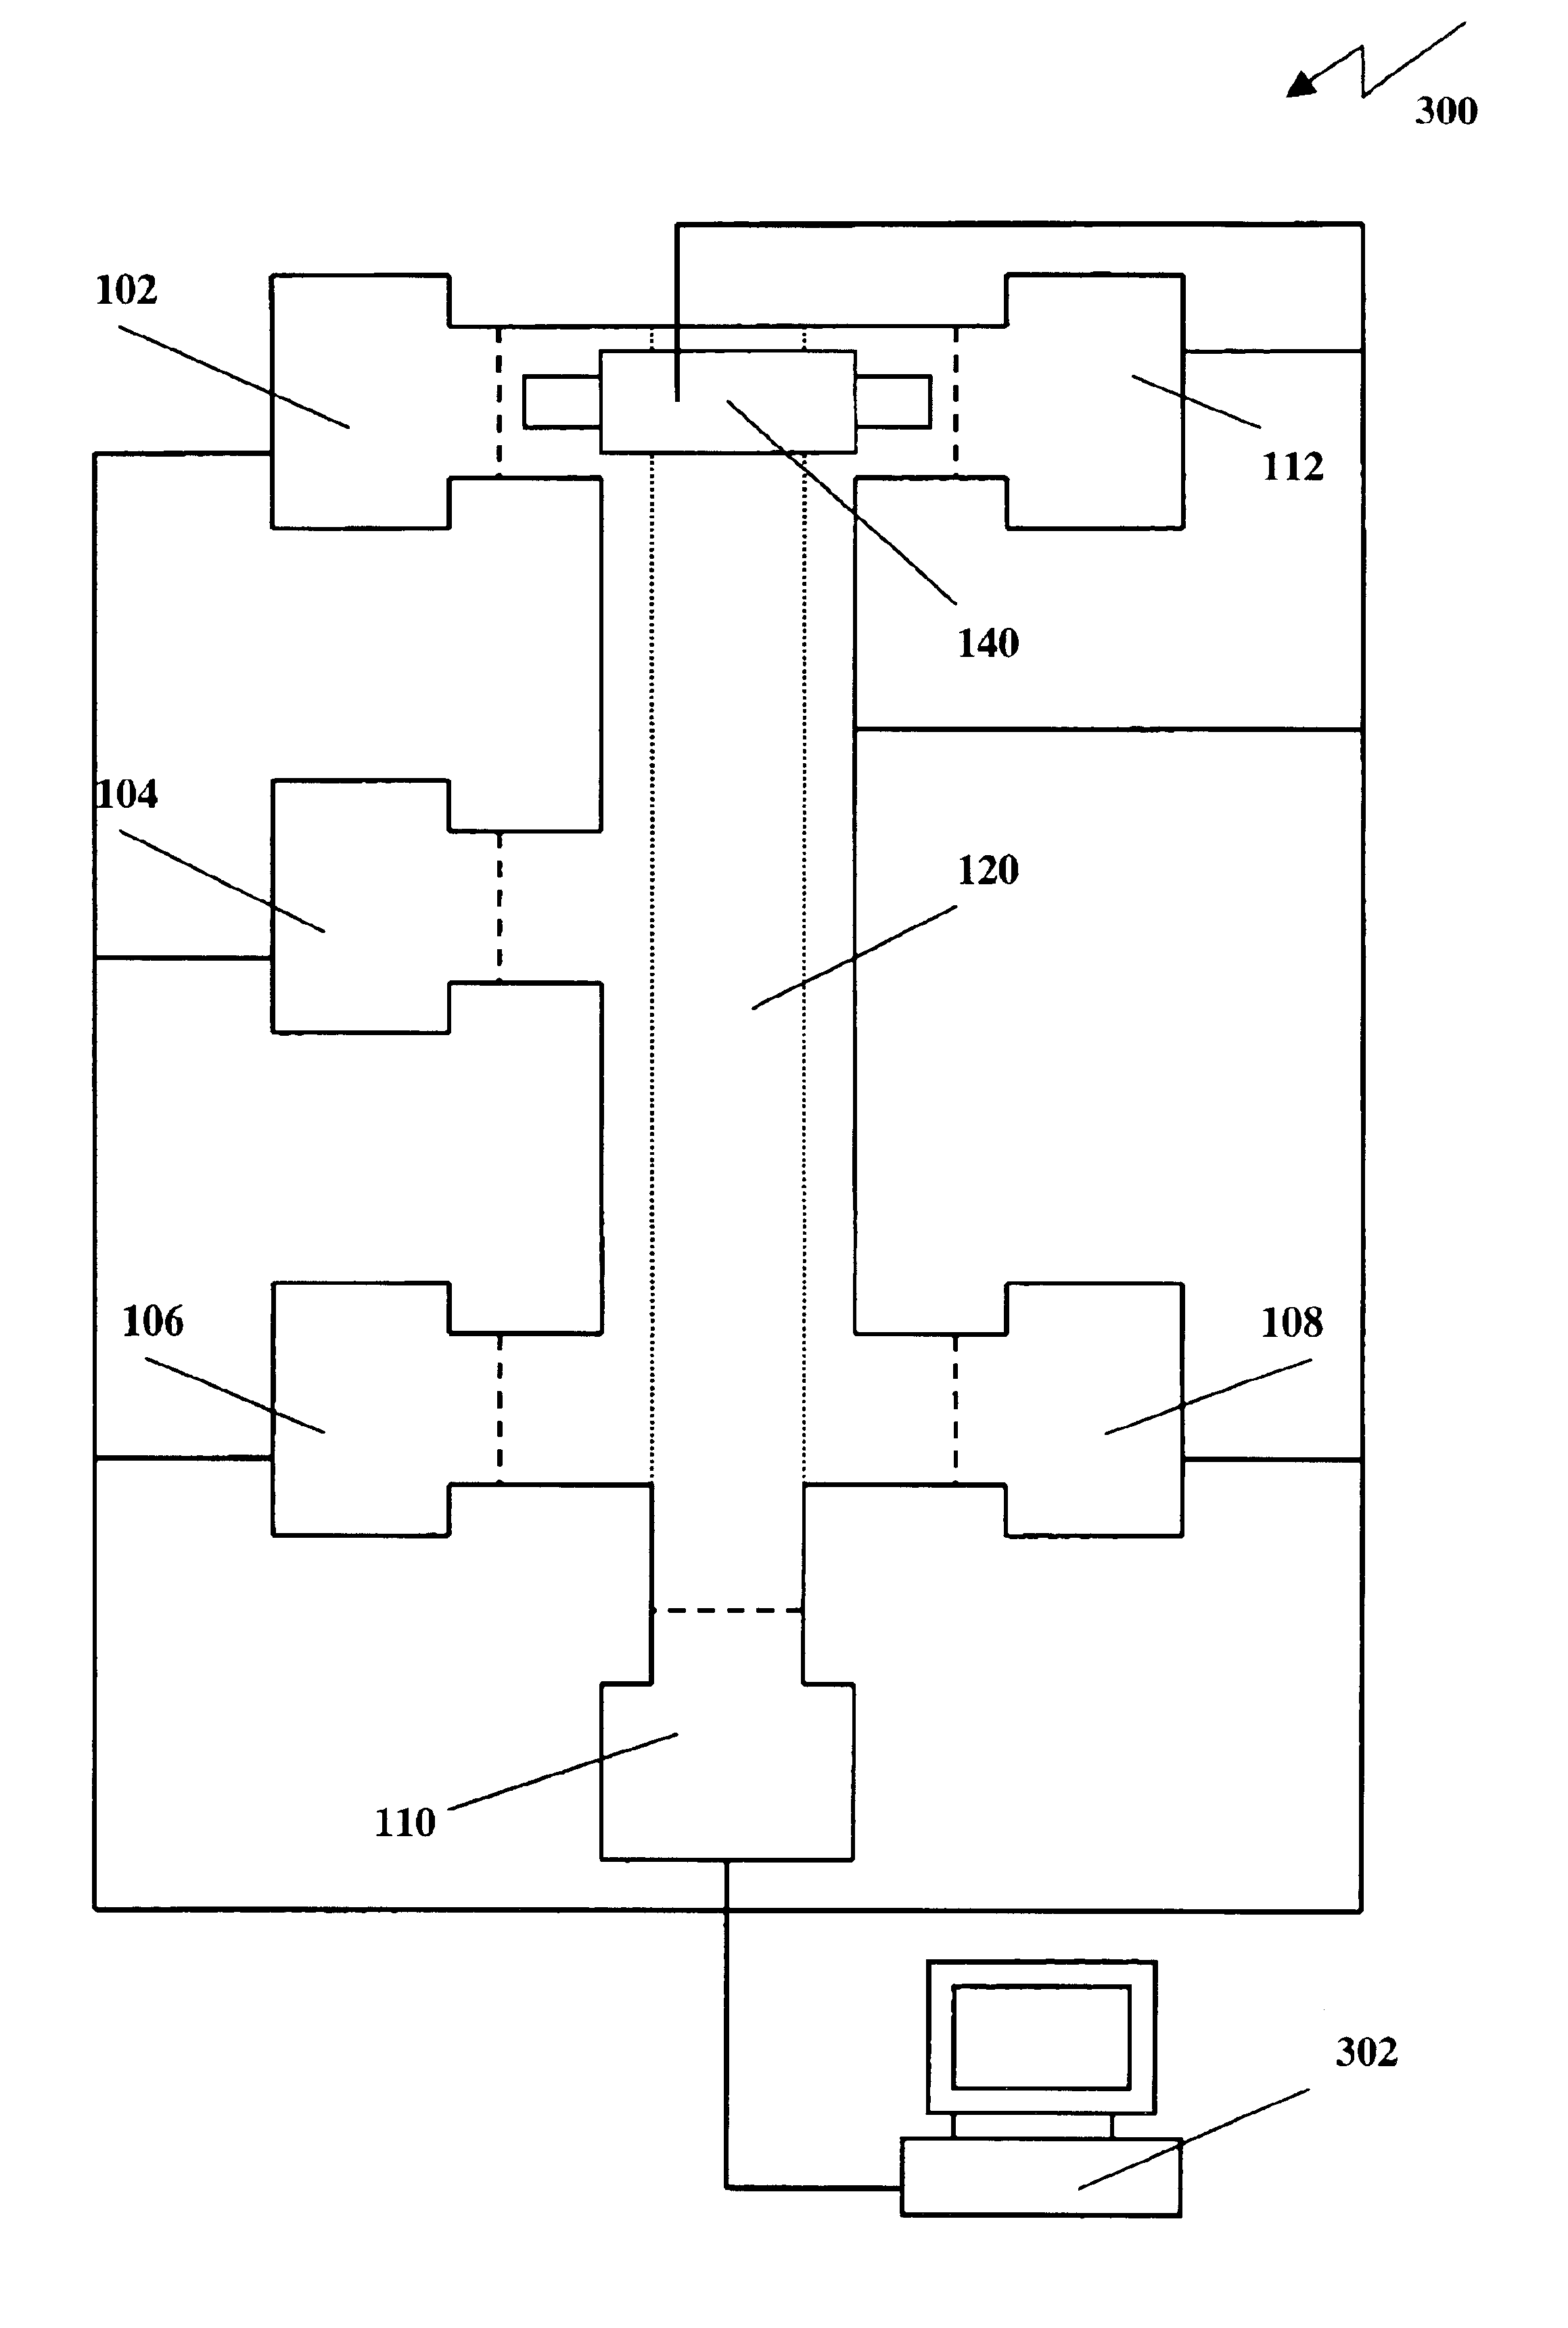 Multi-cell thermal processing unit